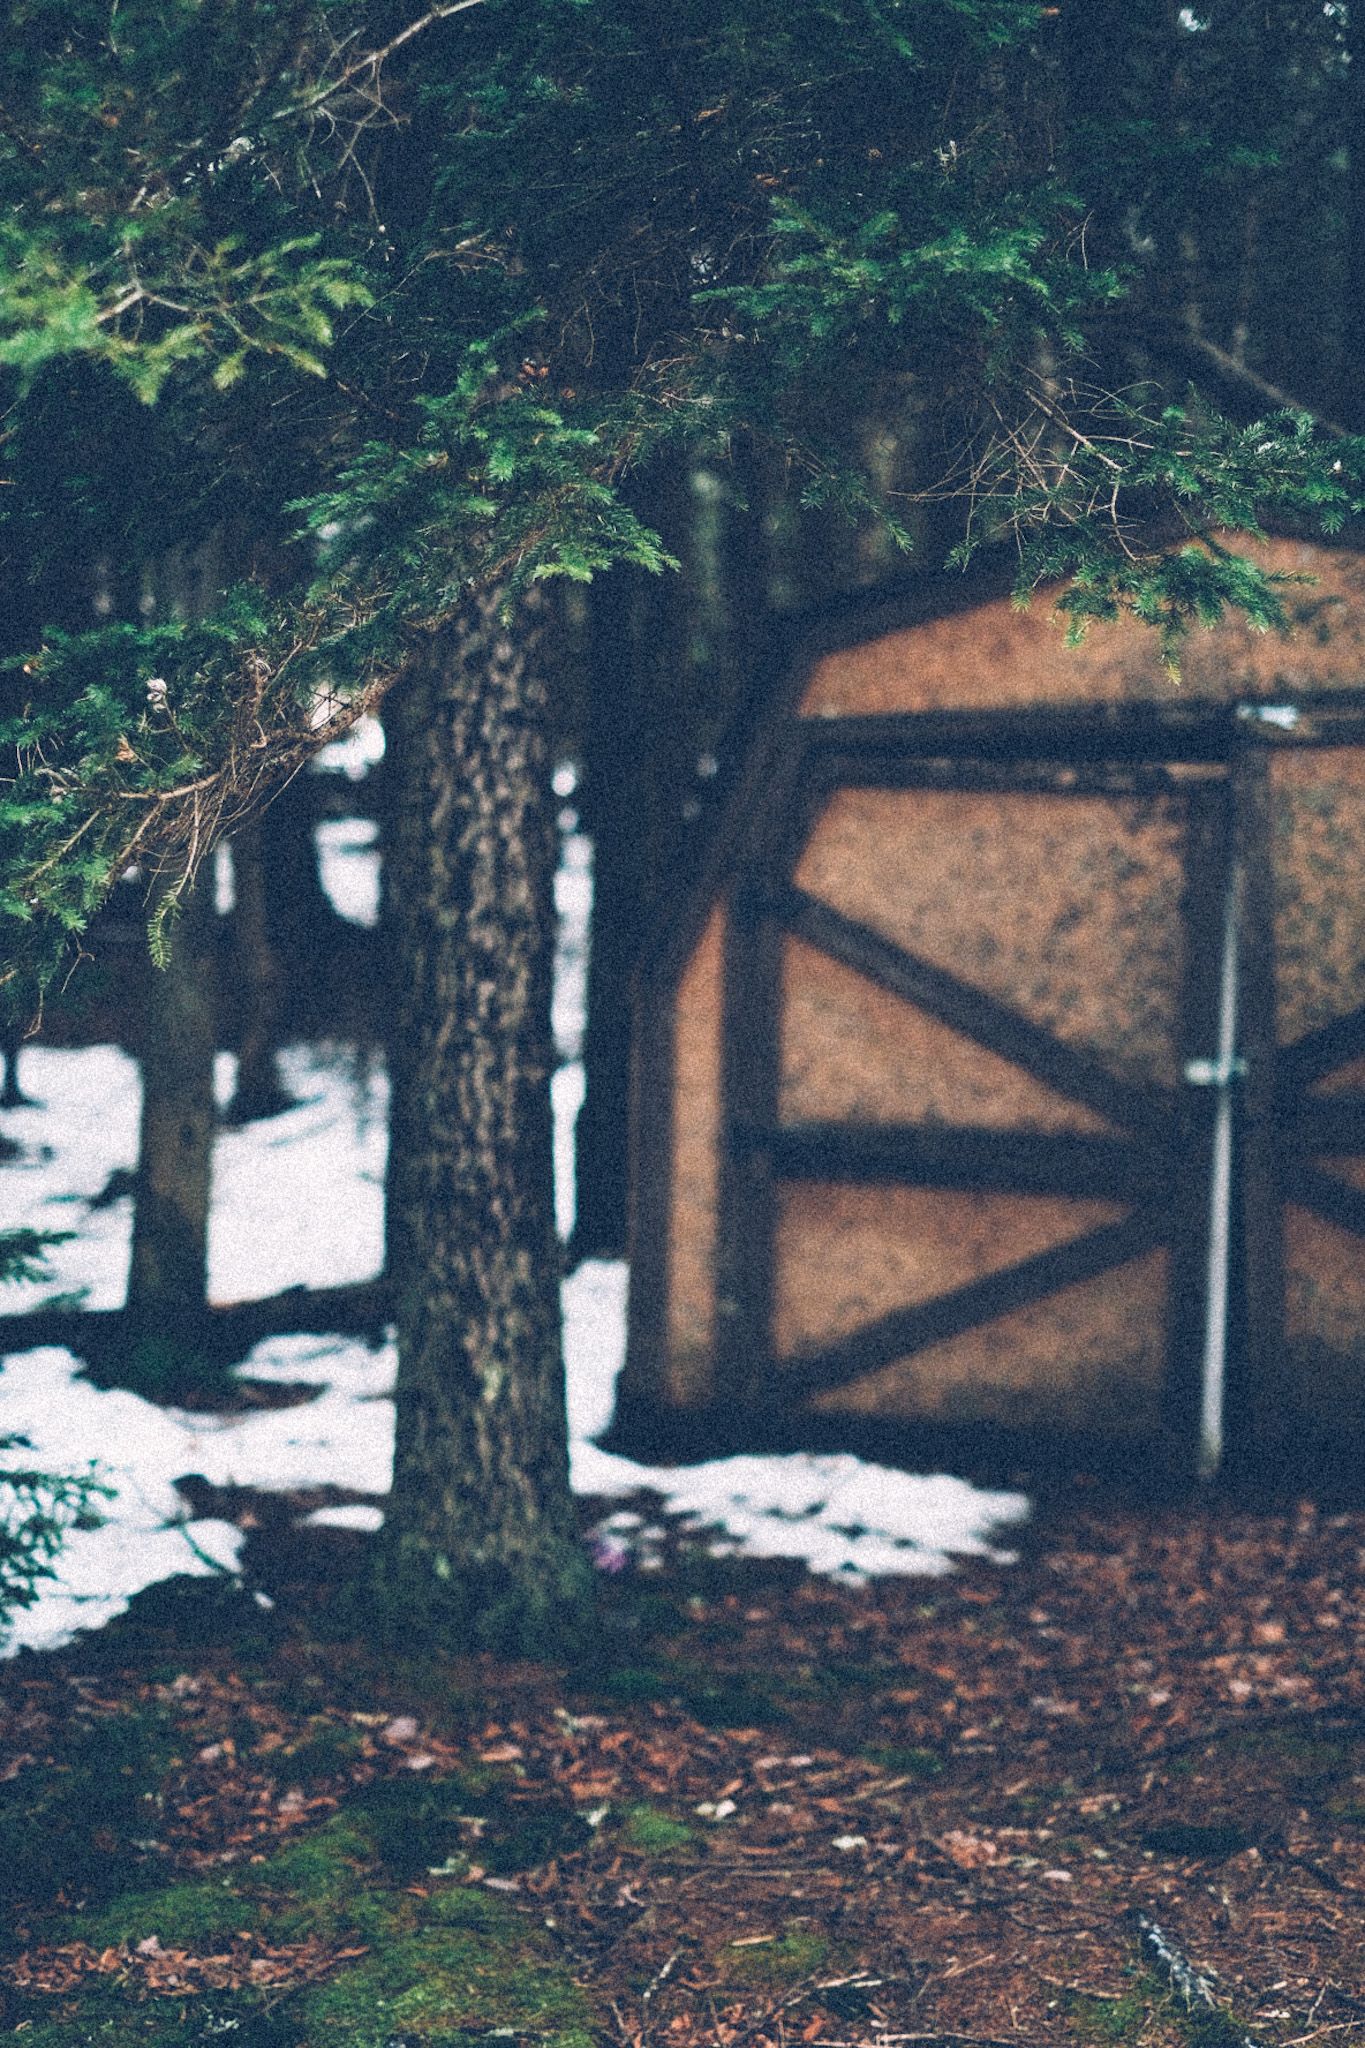 A shed stands behind a tree in a green forest.